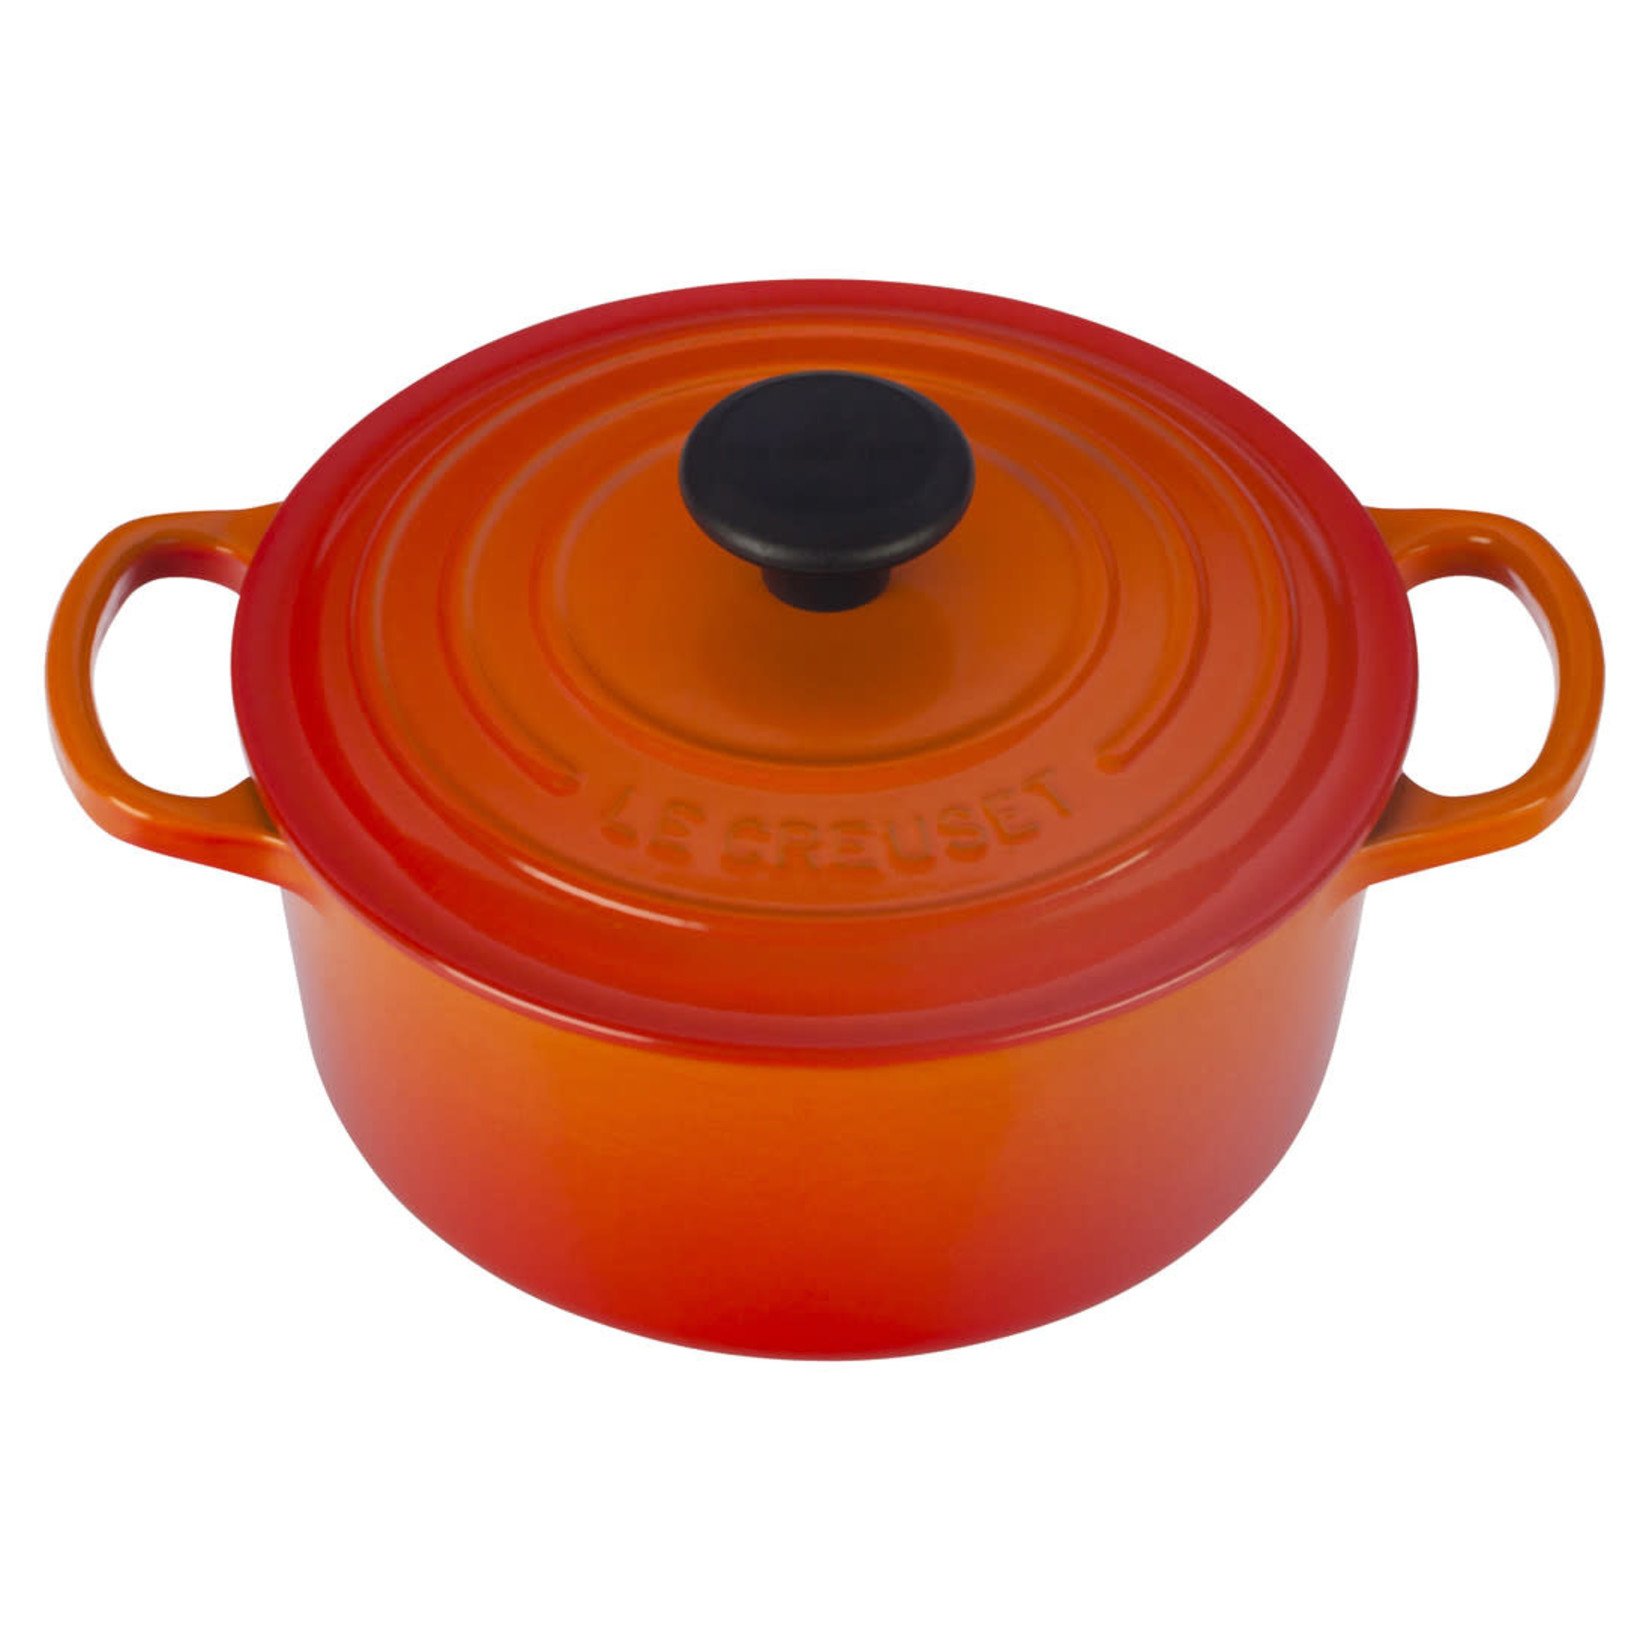 LE CREUSET LE CREUSET Round French Oven 1.8L